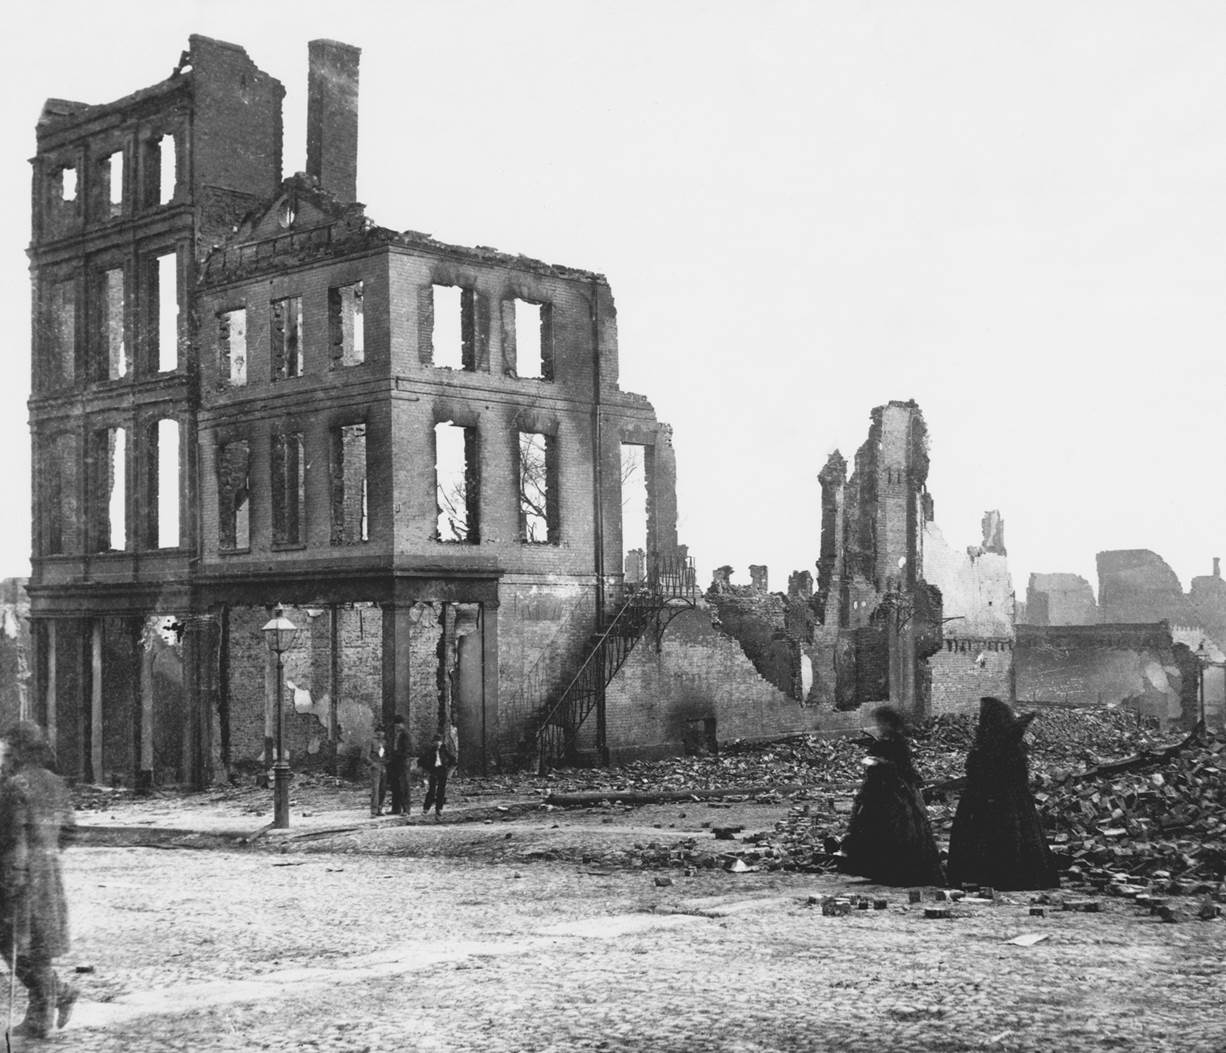 Richmond, Virginia, lies in ruins in April 1865 at the time of Lincoln’s visit—and a few days before